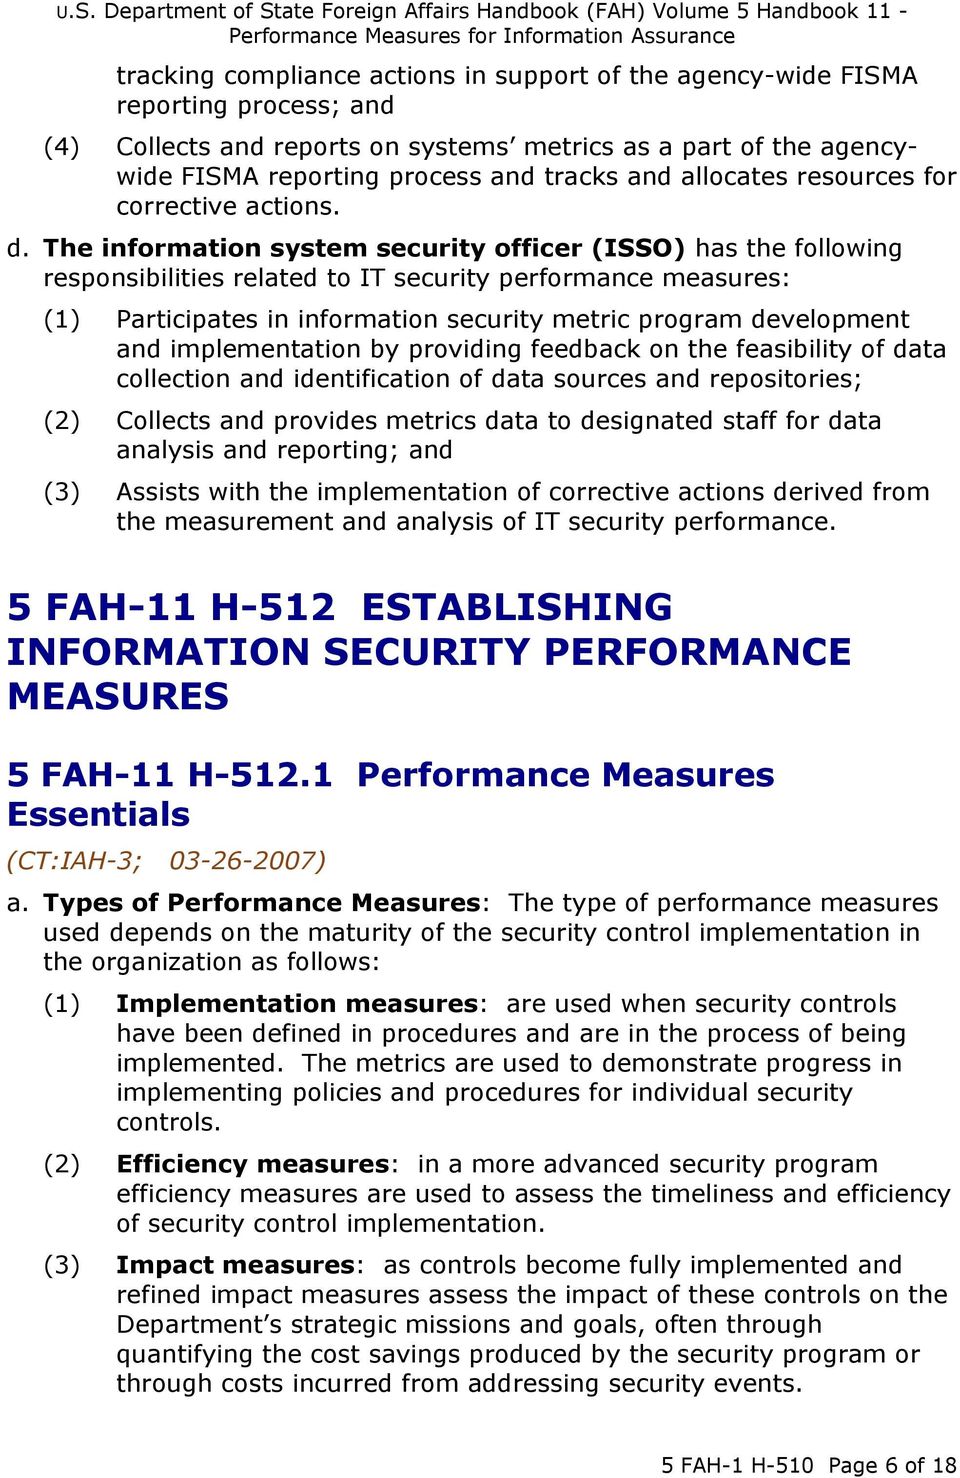 The information system security officer (ISSO) has the following responsibilities related to IT security performance measures: (1) Participates in information security metric program development and